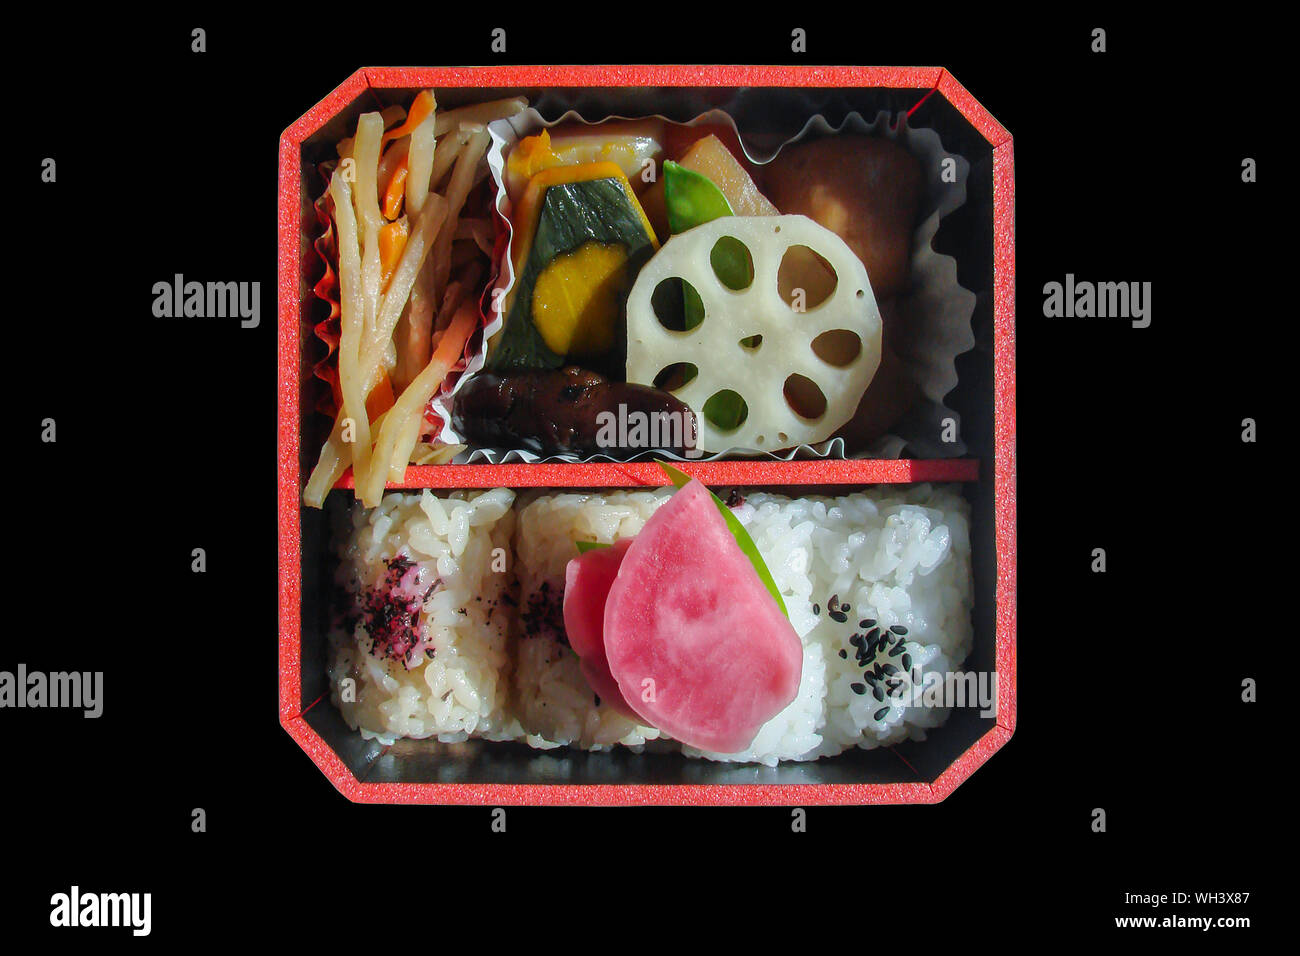 Top view of a square japanese bento box with rice and vegetables, isolated on black background Stock Photo